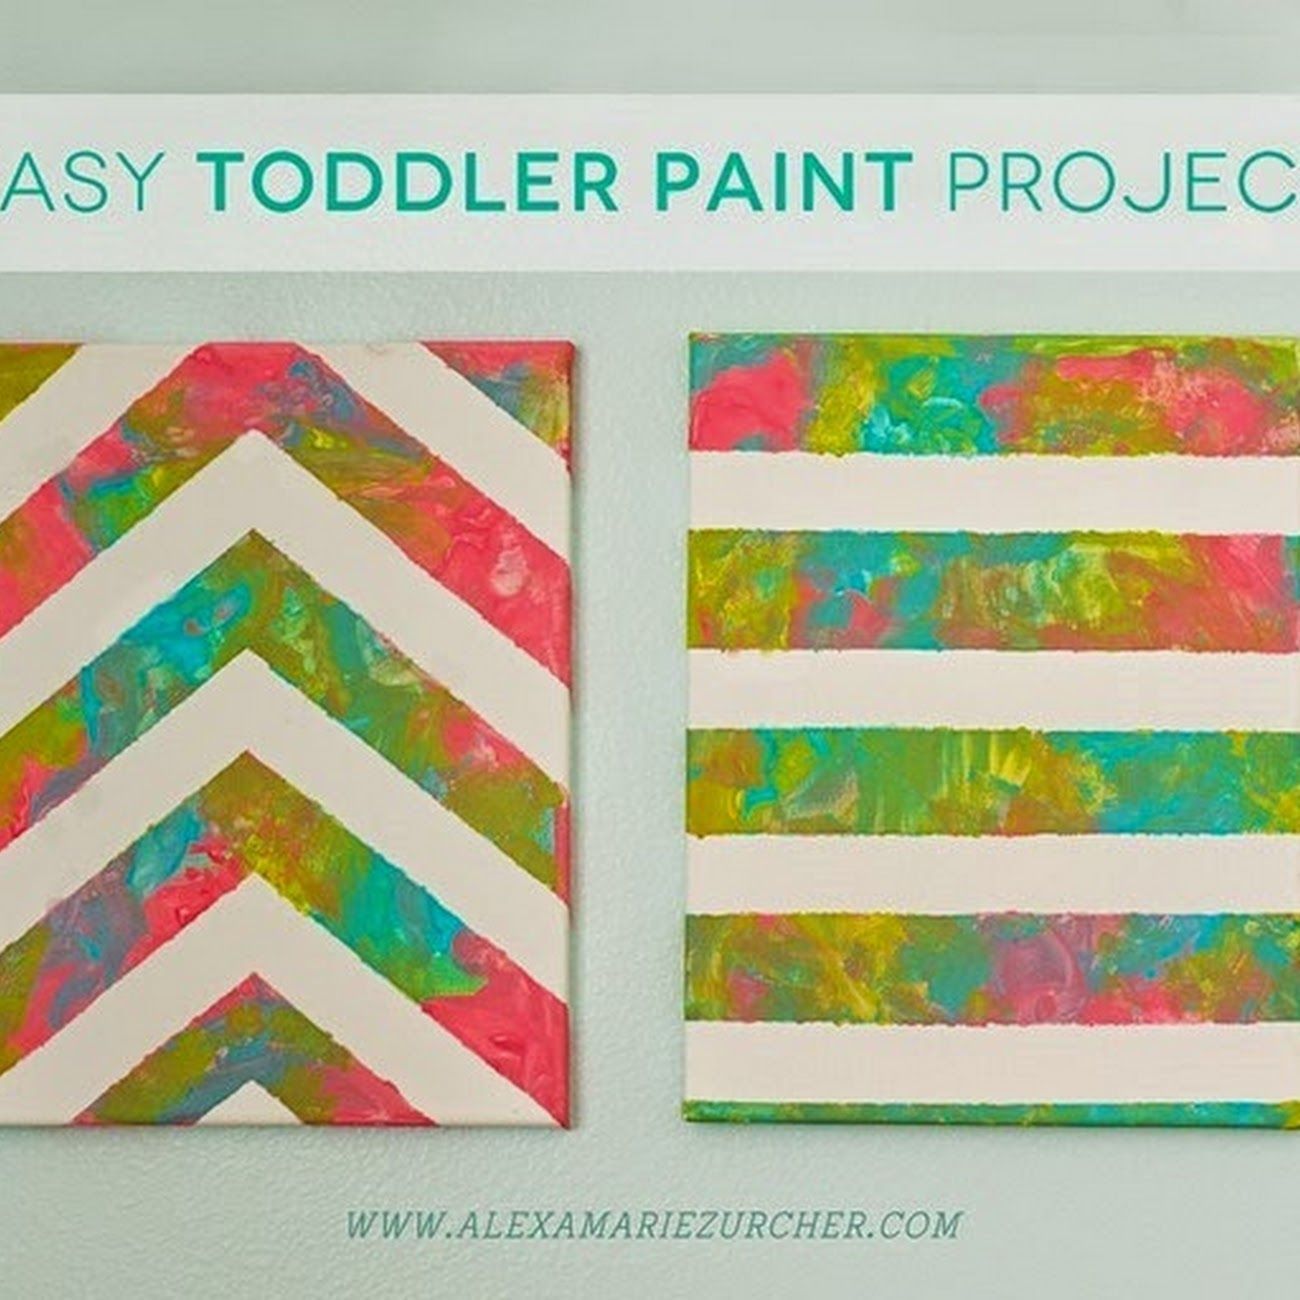 Easy Toddler Paint Project -   24 toddler crafts for girls
 ideas